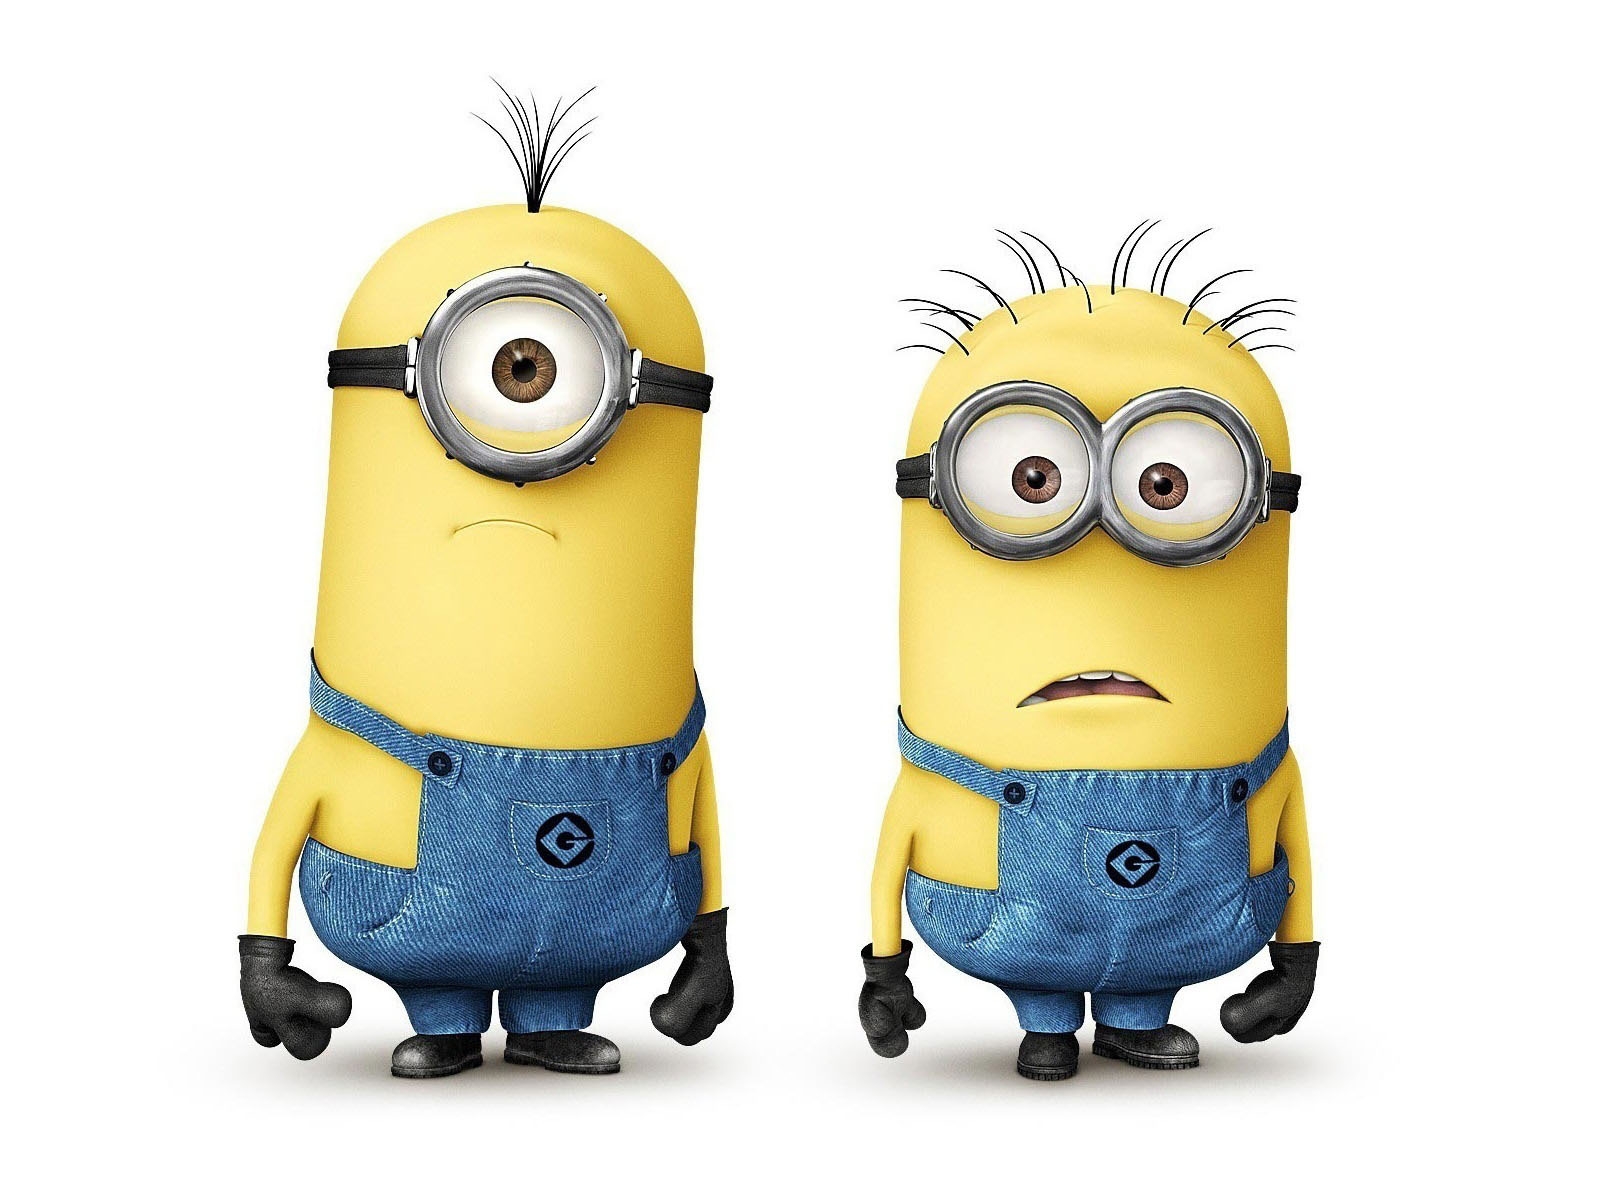 2013 Despicable Me 2 for 1600 x 1200 resolution